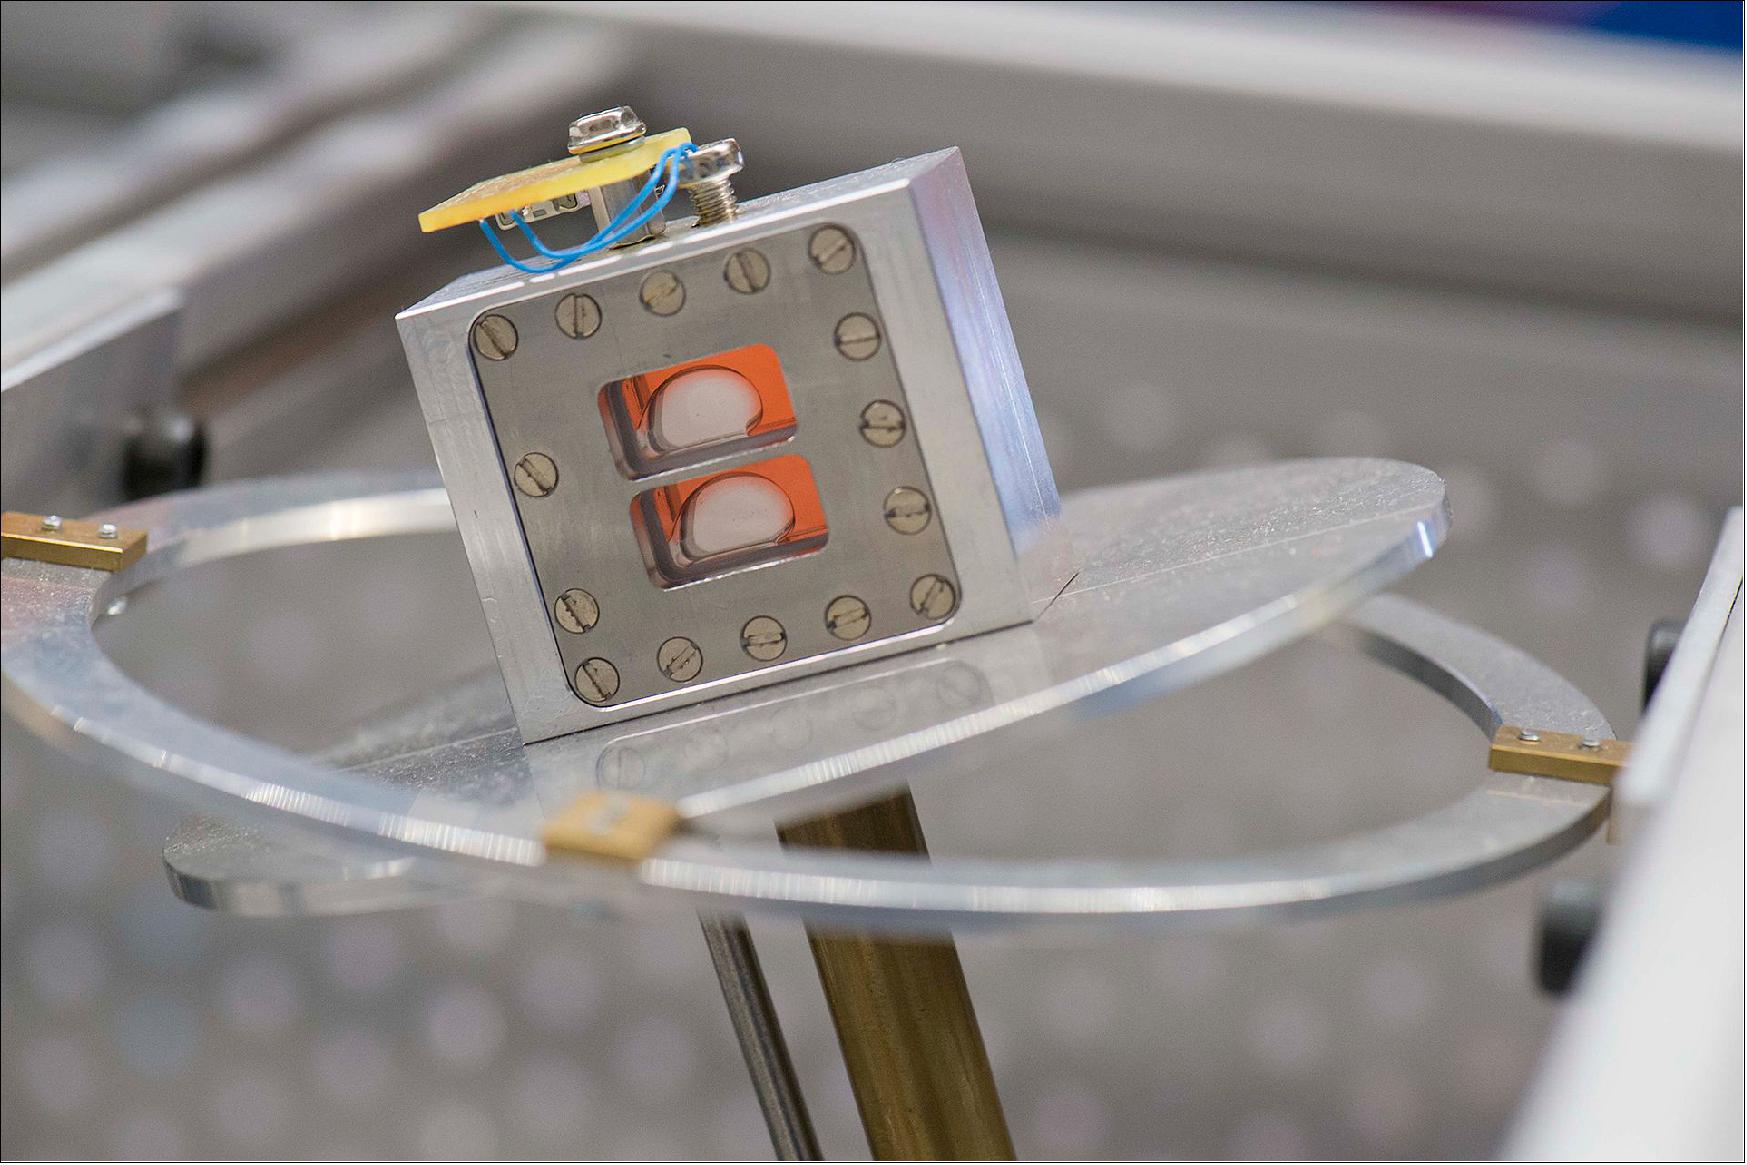 Figure 38: This picture shows a prototype container. The articulated base keeps the contents as stable as possible during launch while a motor vibrates the container at specific frequencies for the experiment (image credit: ESA/MRC/ULB)